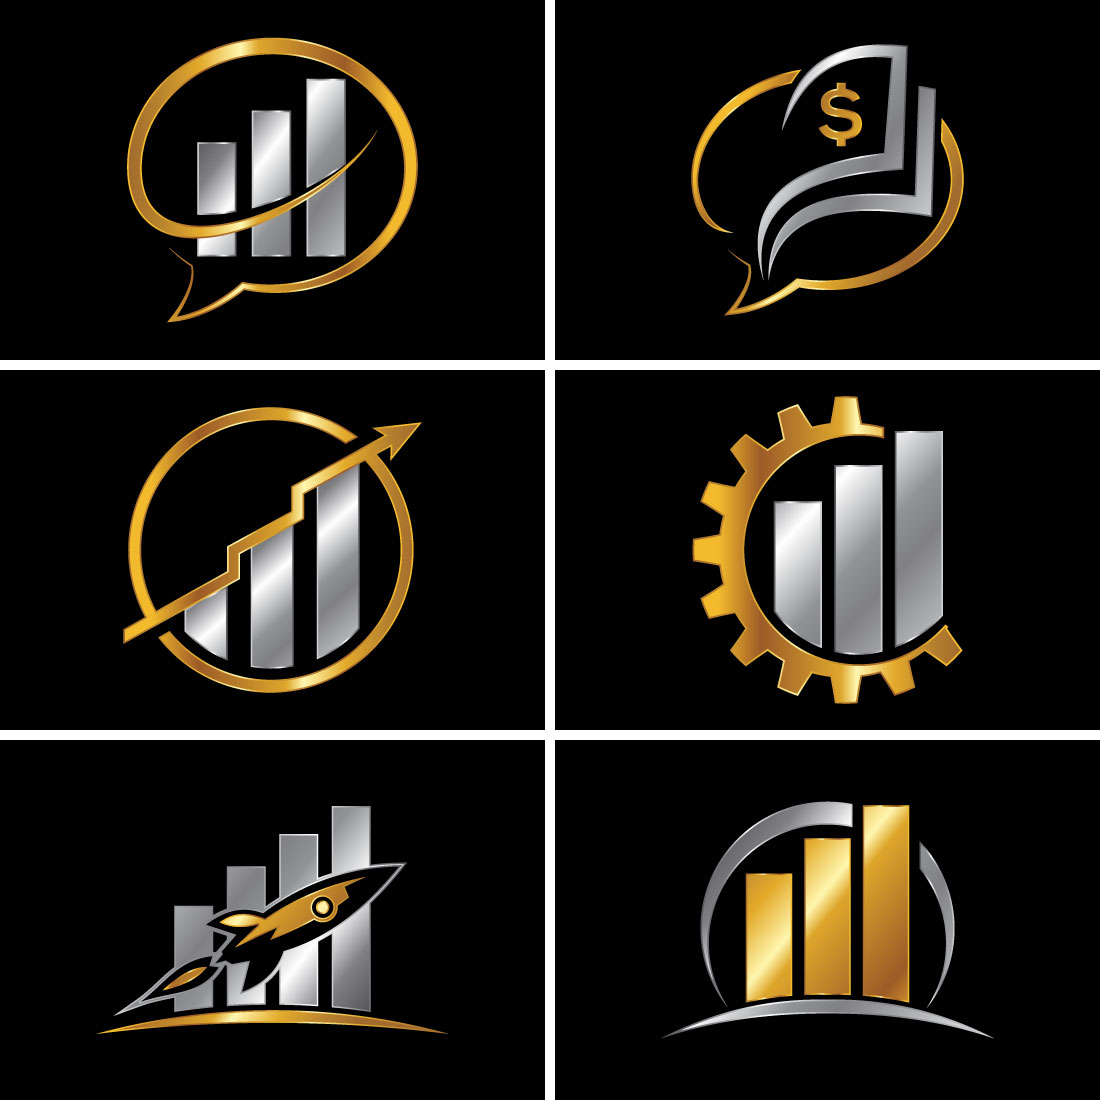 Finance and Accounting Logo Set main cover.